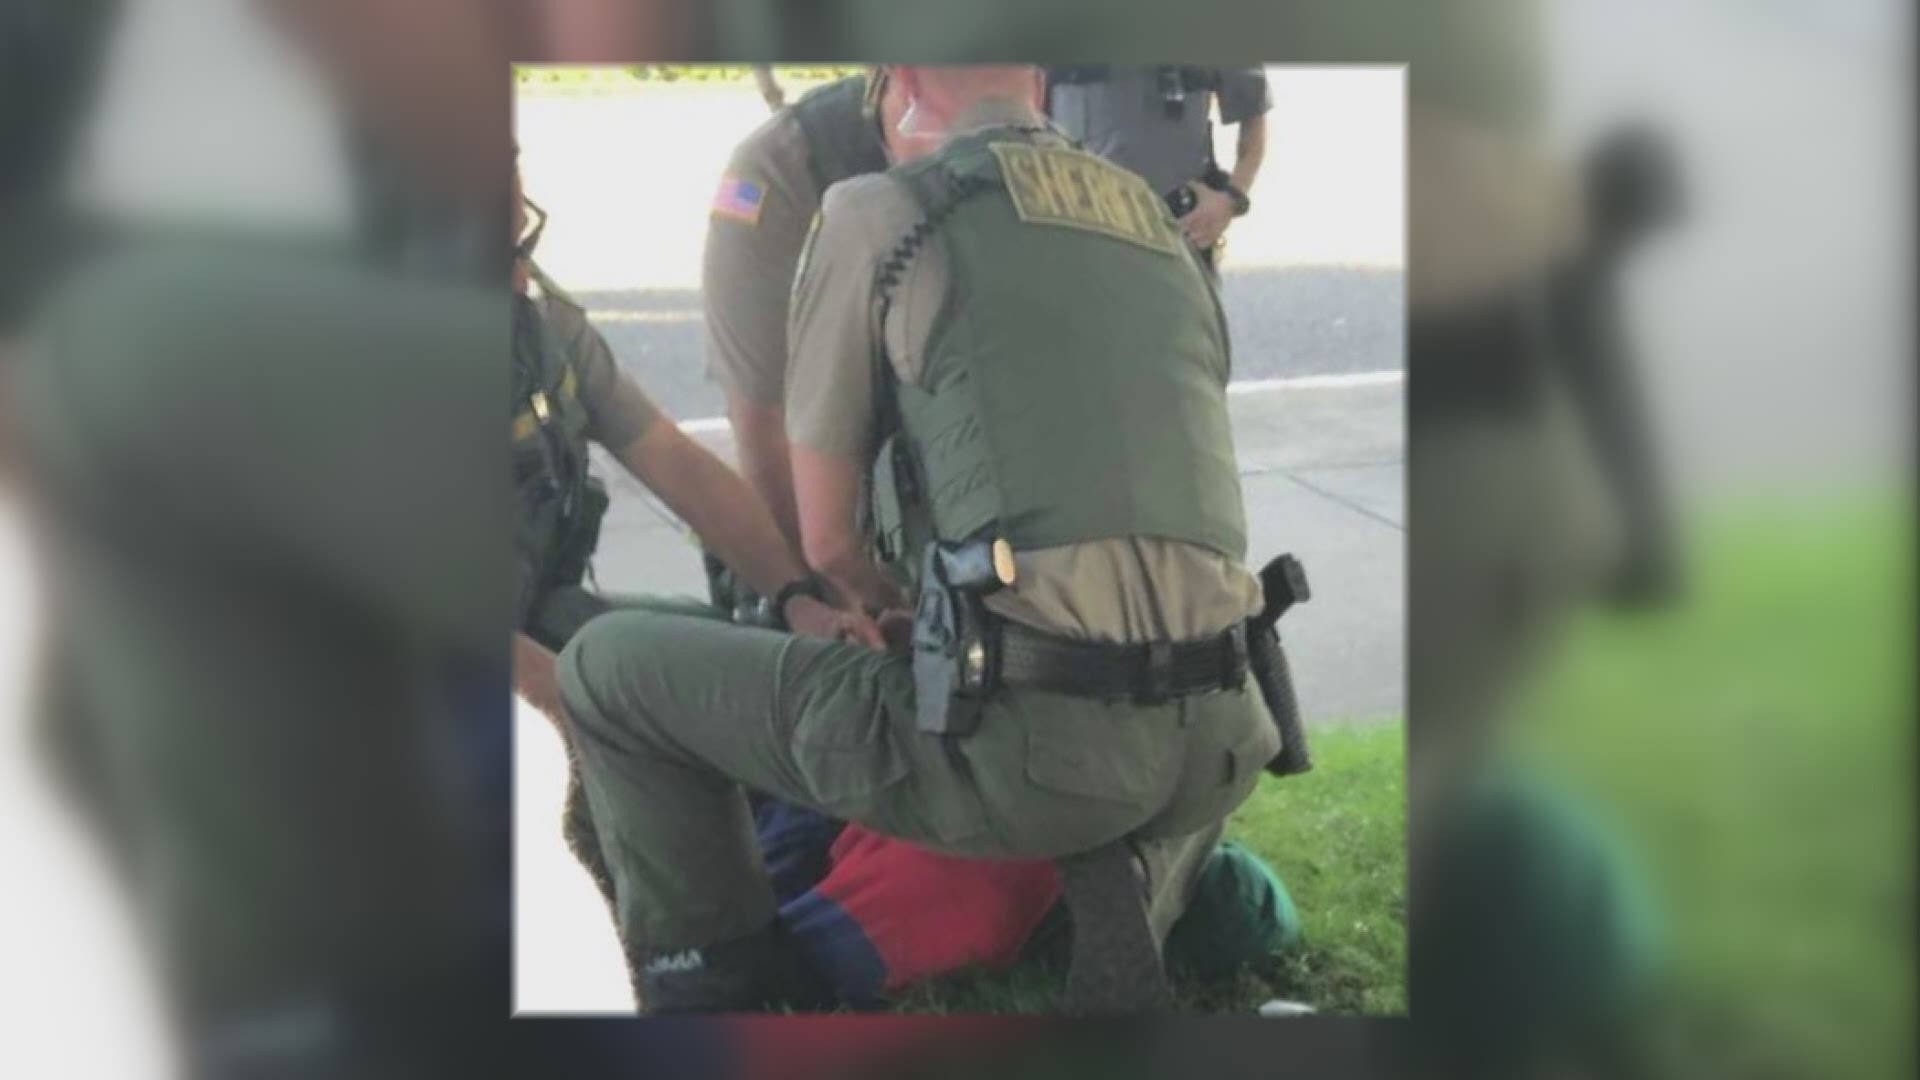 The Clackamas County Sheriff's Office is disputing the allegations stemming from the August 2019 incident.